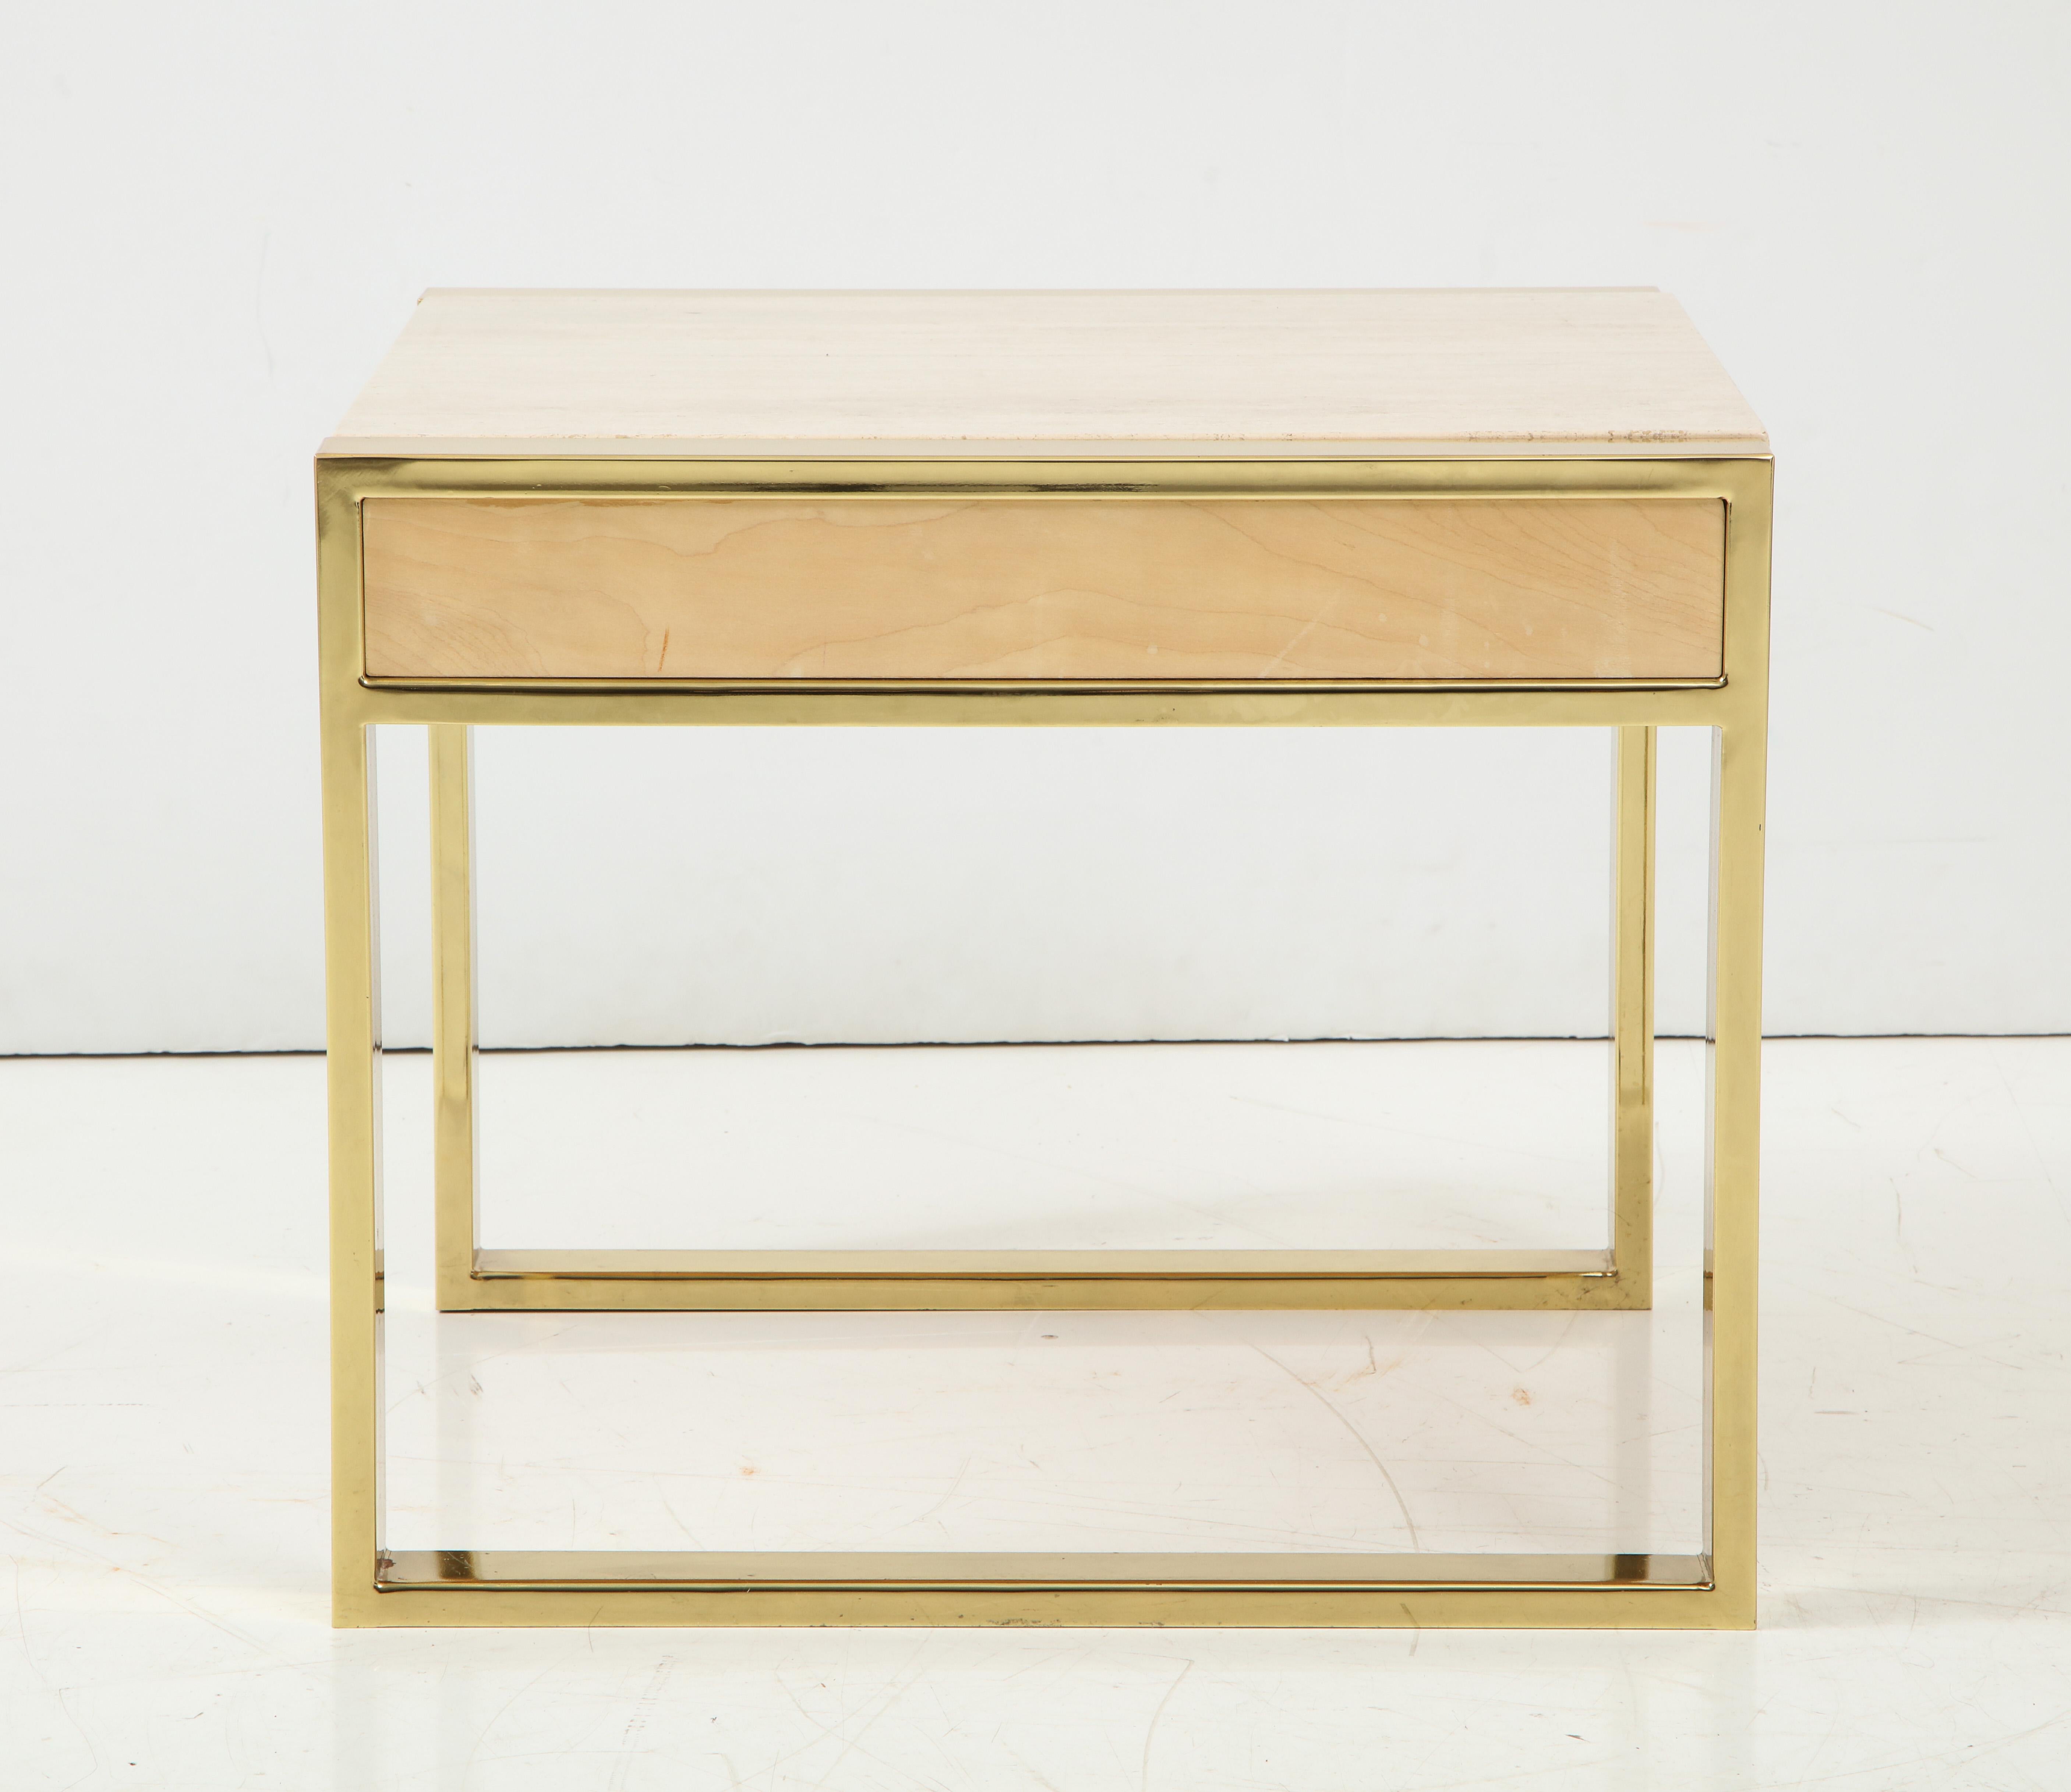 American Polished Brass and Travertine Side Table